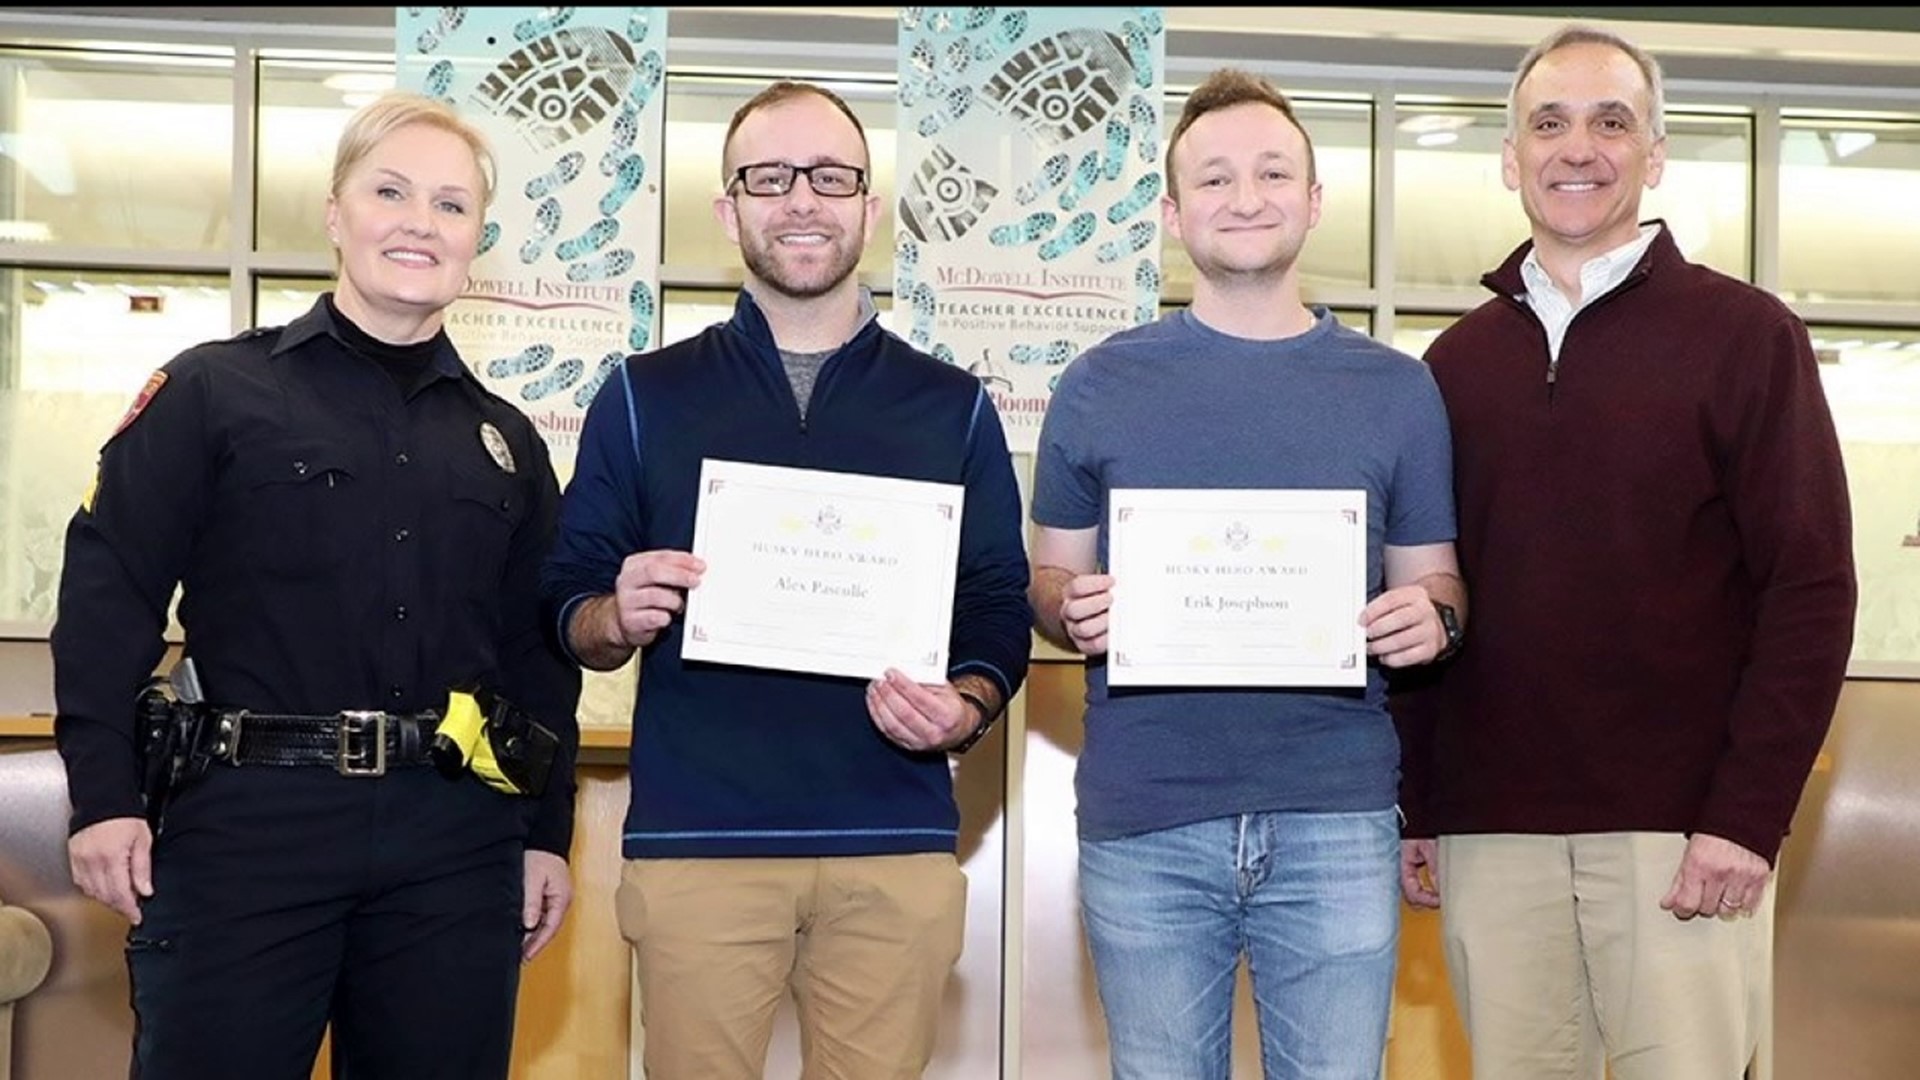 Two students, who are also EMTs, sprang into action when a fellow student had a series of seizures.